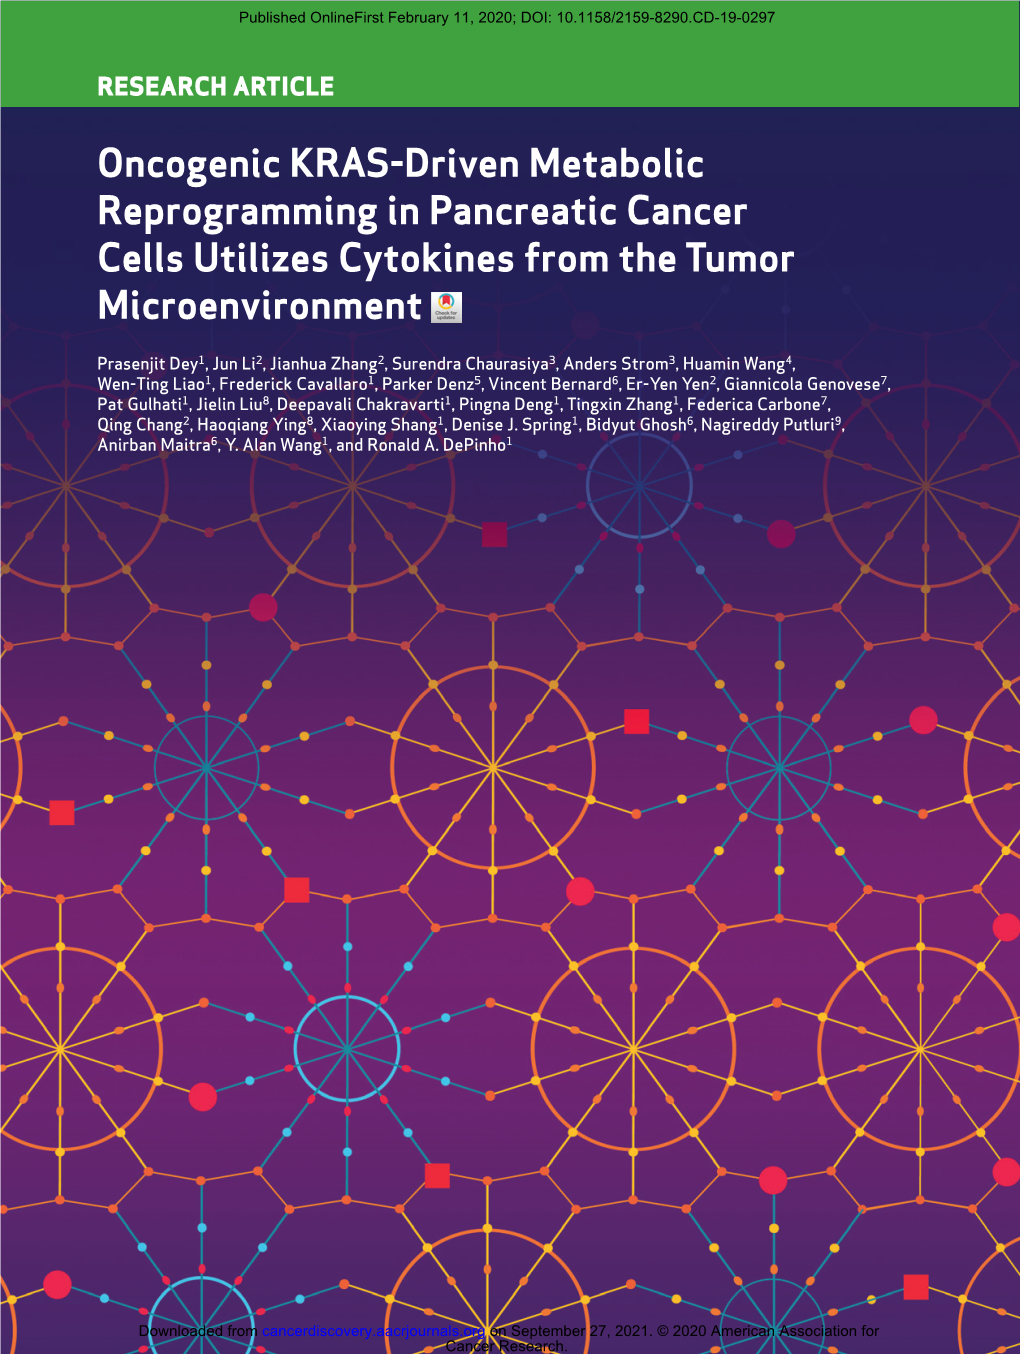 Oncogenic KRAS-Driven Metabolic Reprogramming in Pancreatic Cancer Cells Utilizes Cytokines from the Tumor Microenvironment